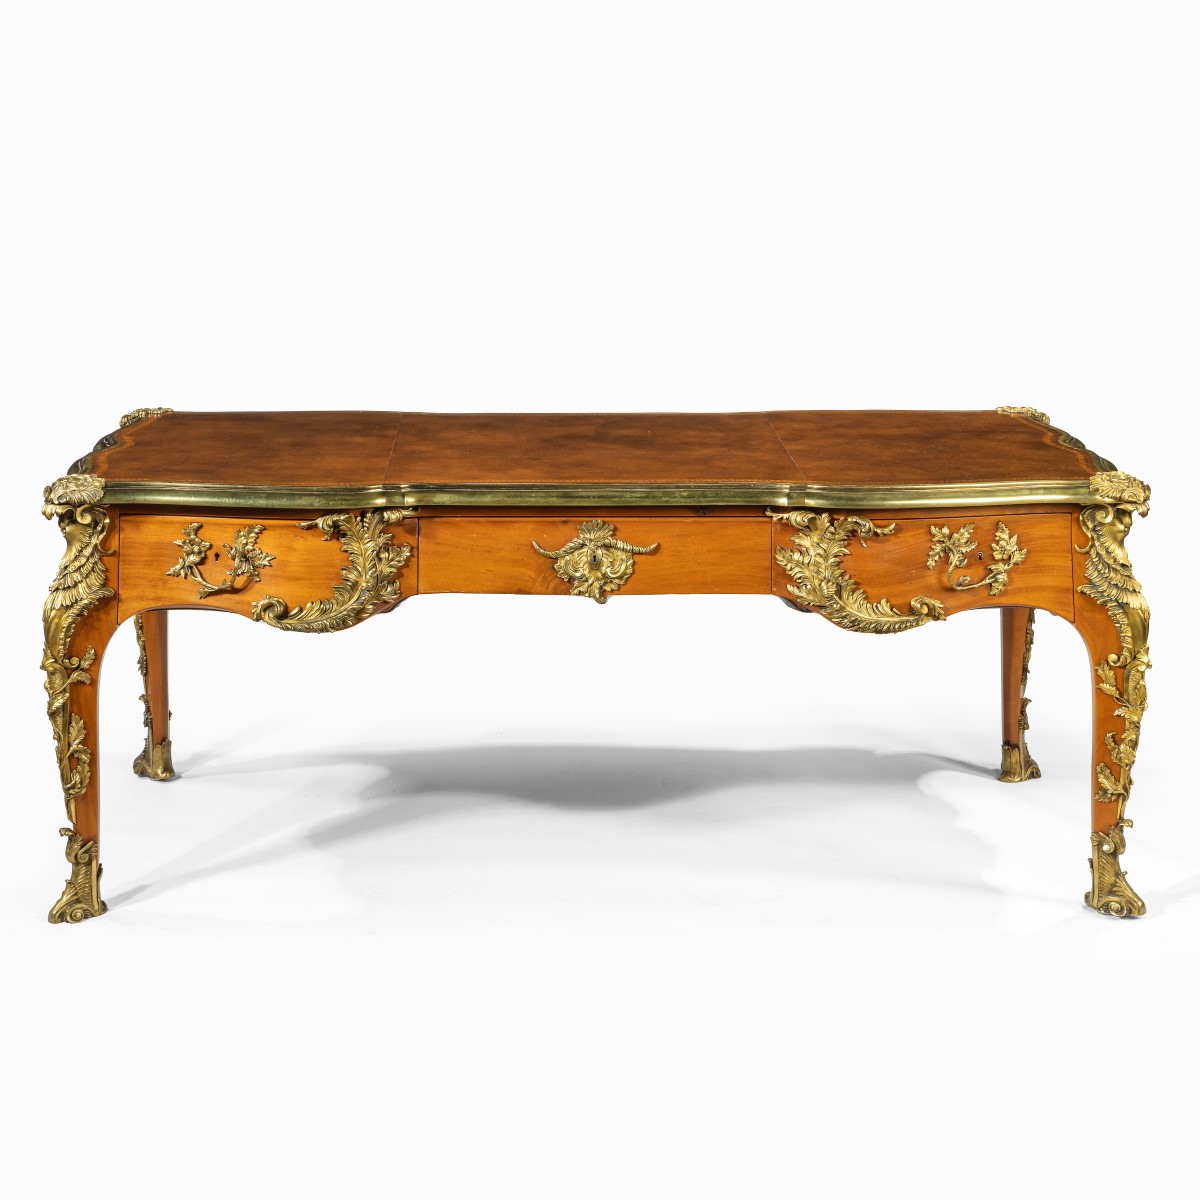 An outstanding Louis XV-style mahogany bureau plat after a model by Jacques B. Dubois, from the estate of Phyllis McGuire